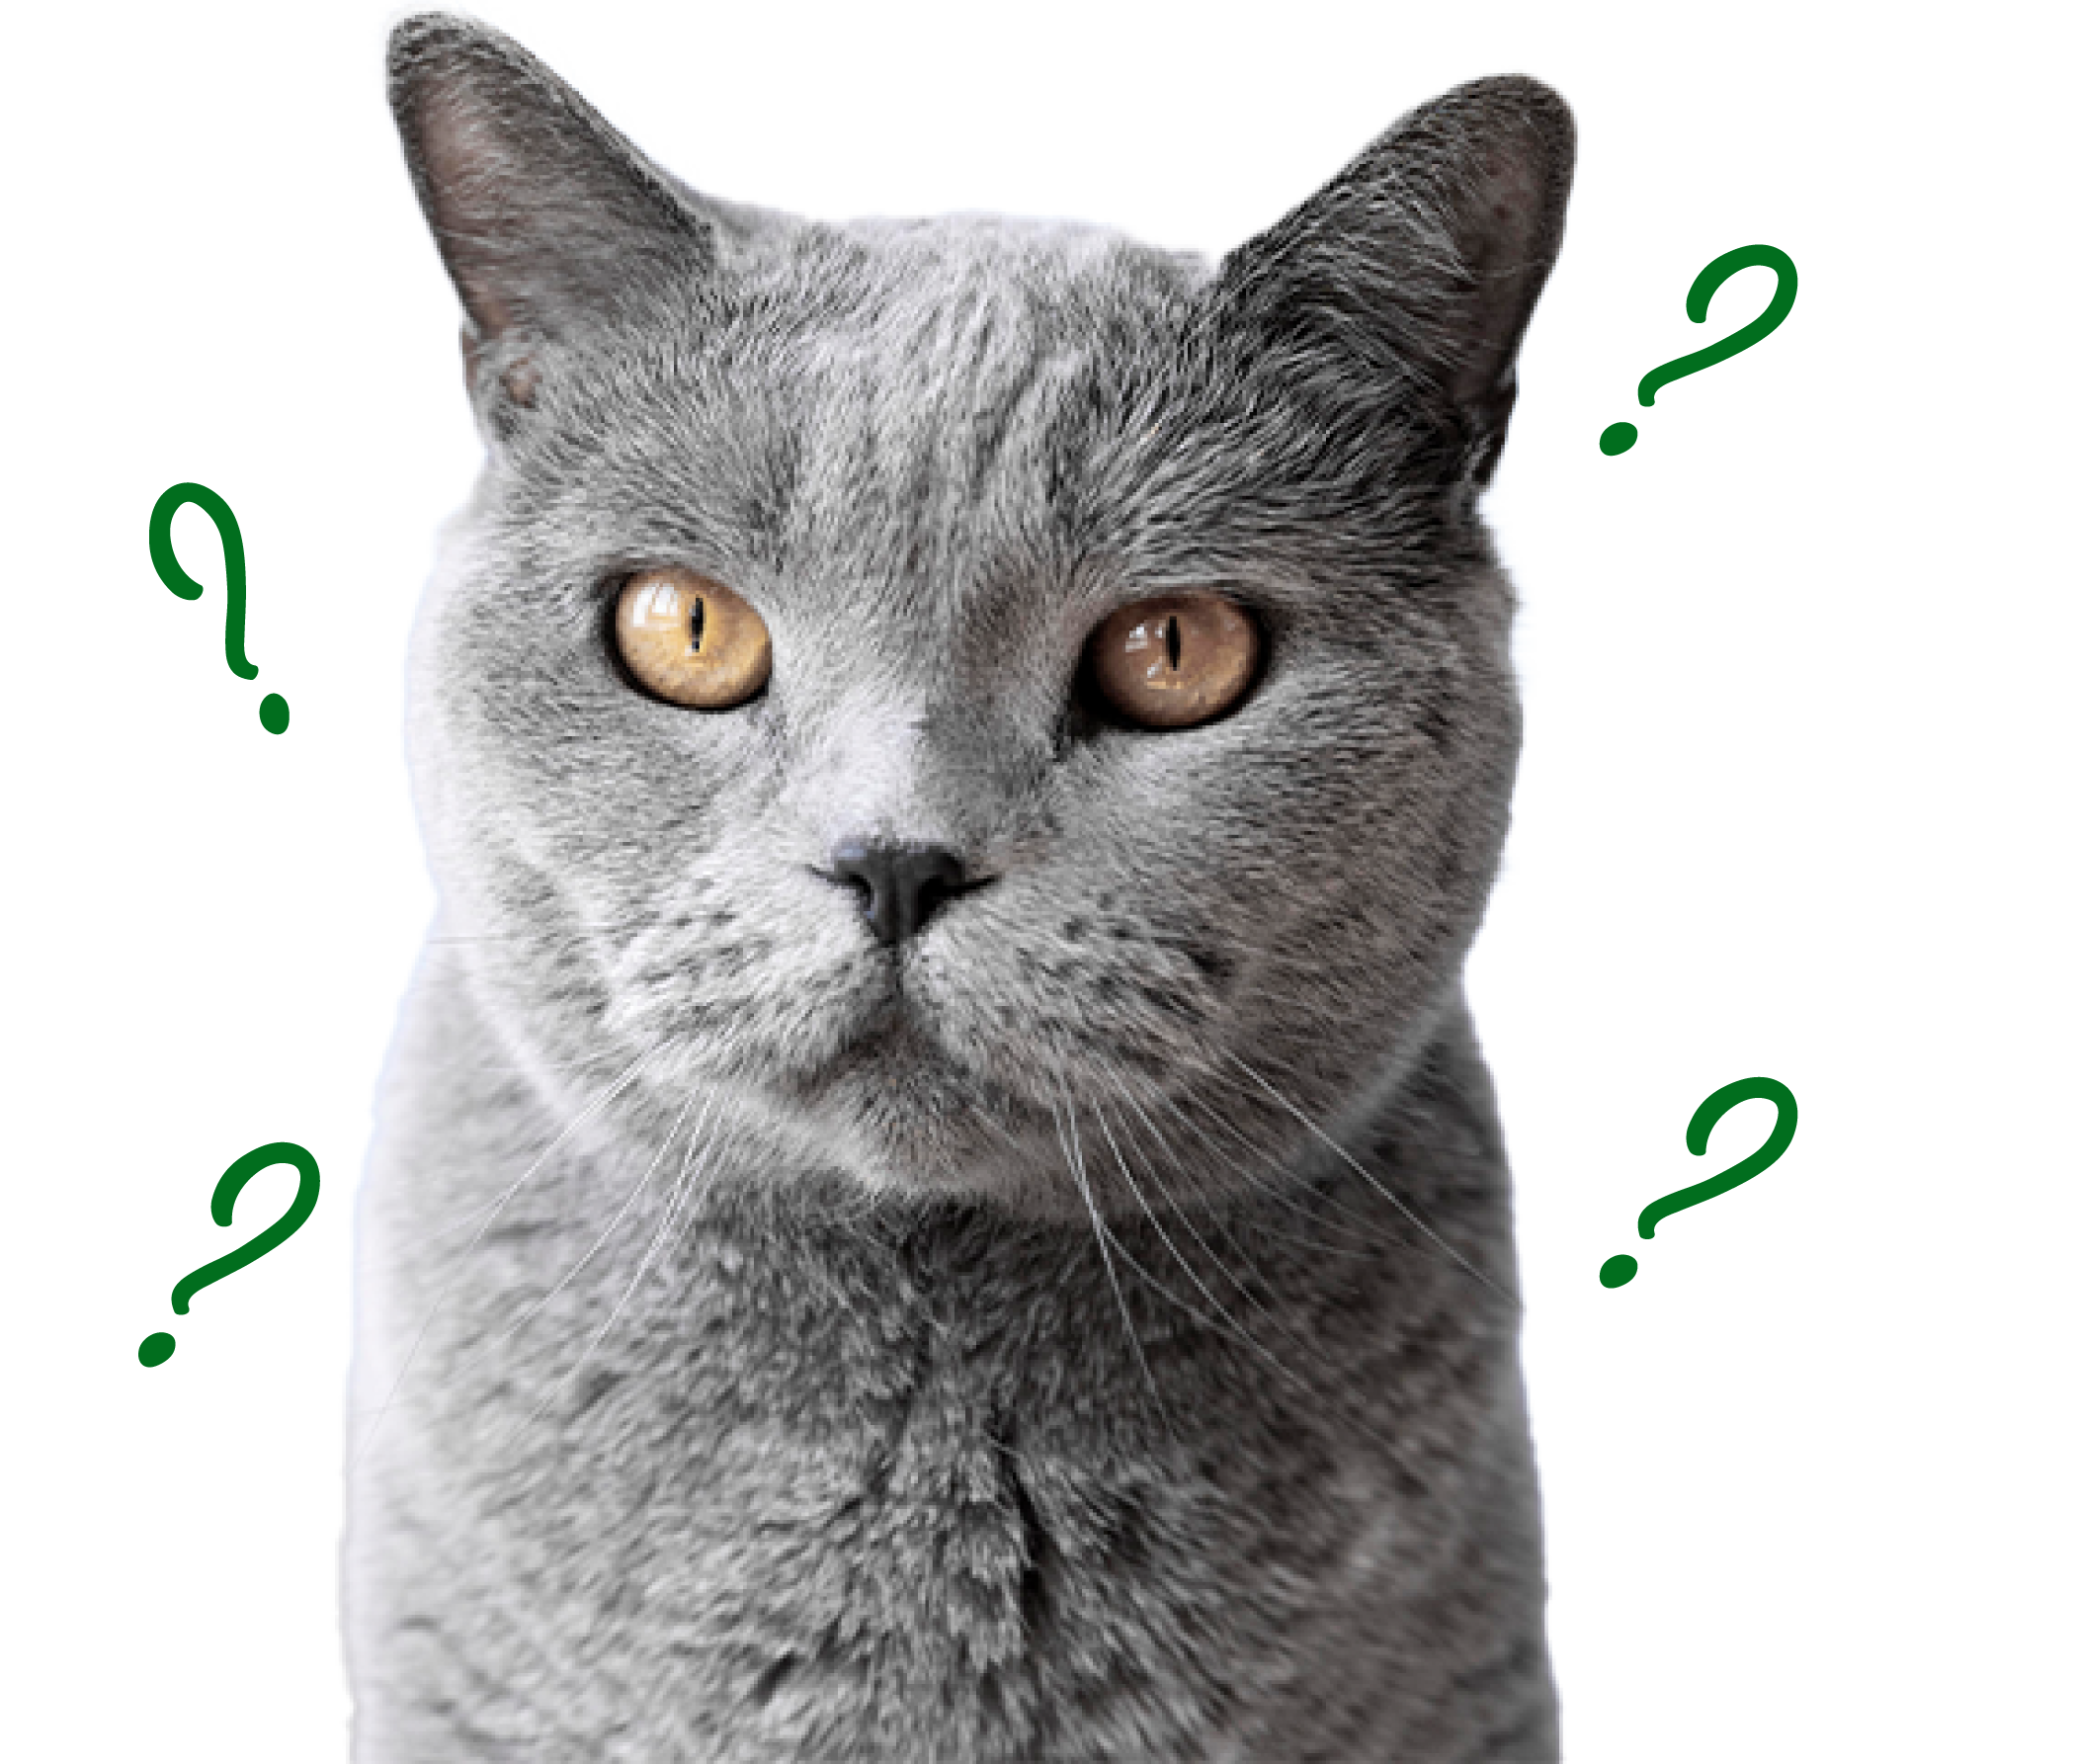 close up of grey cat with golden eyes surrounded by 4 green imaginary question marks